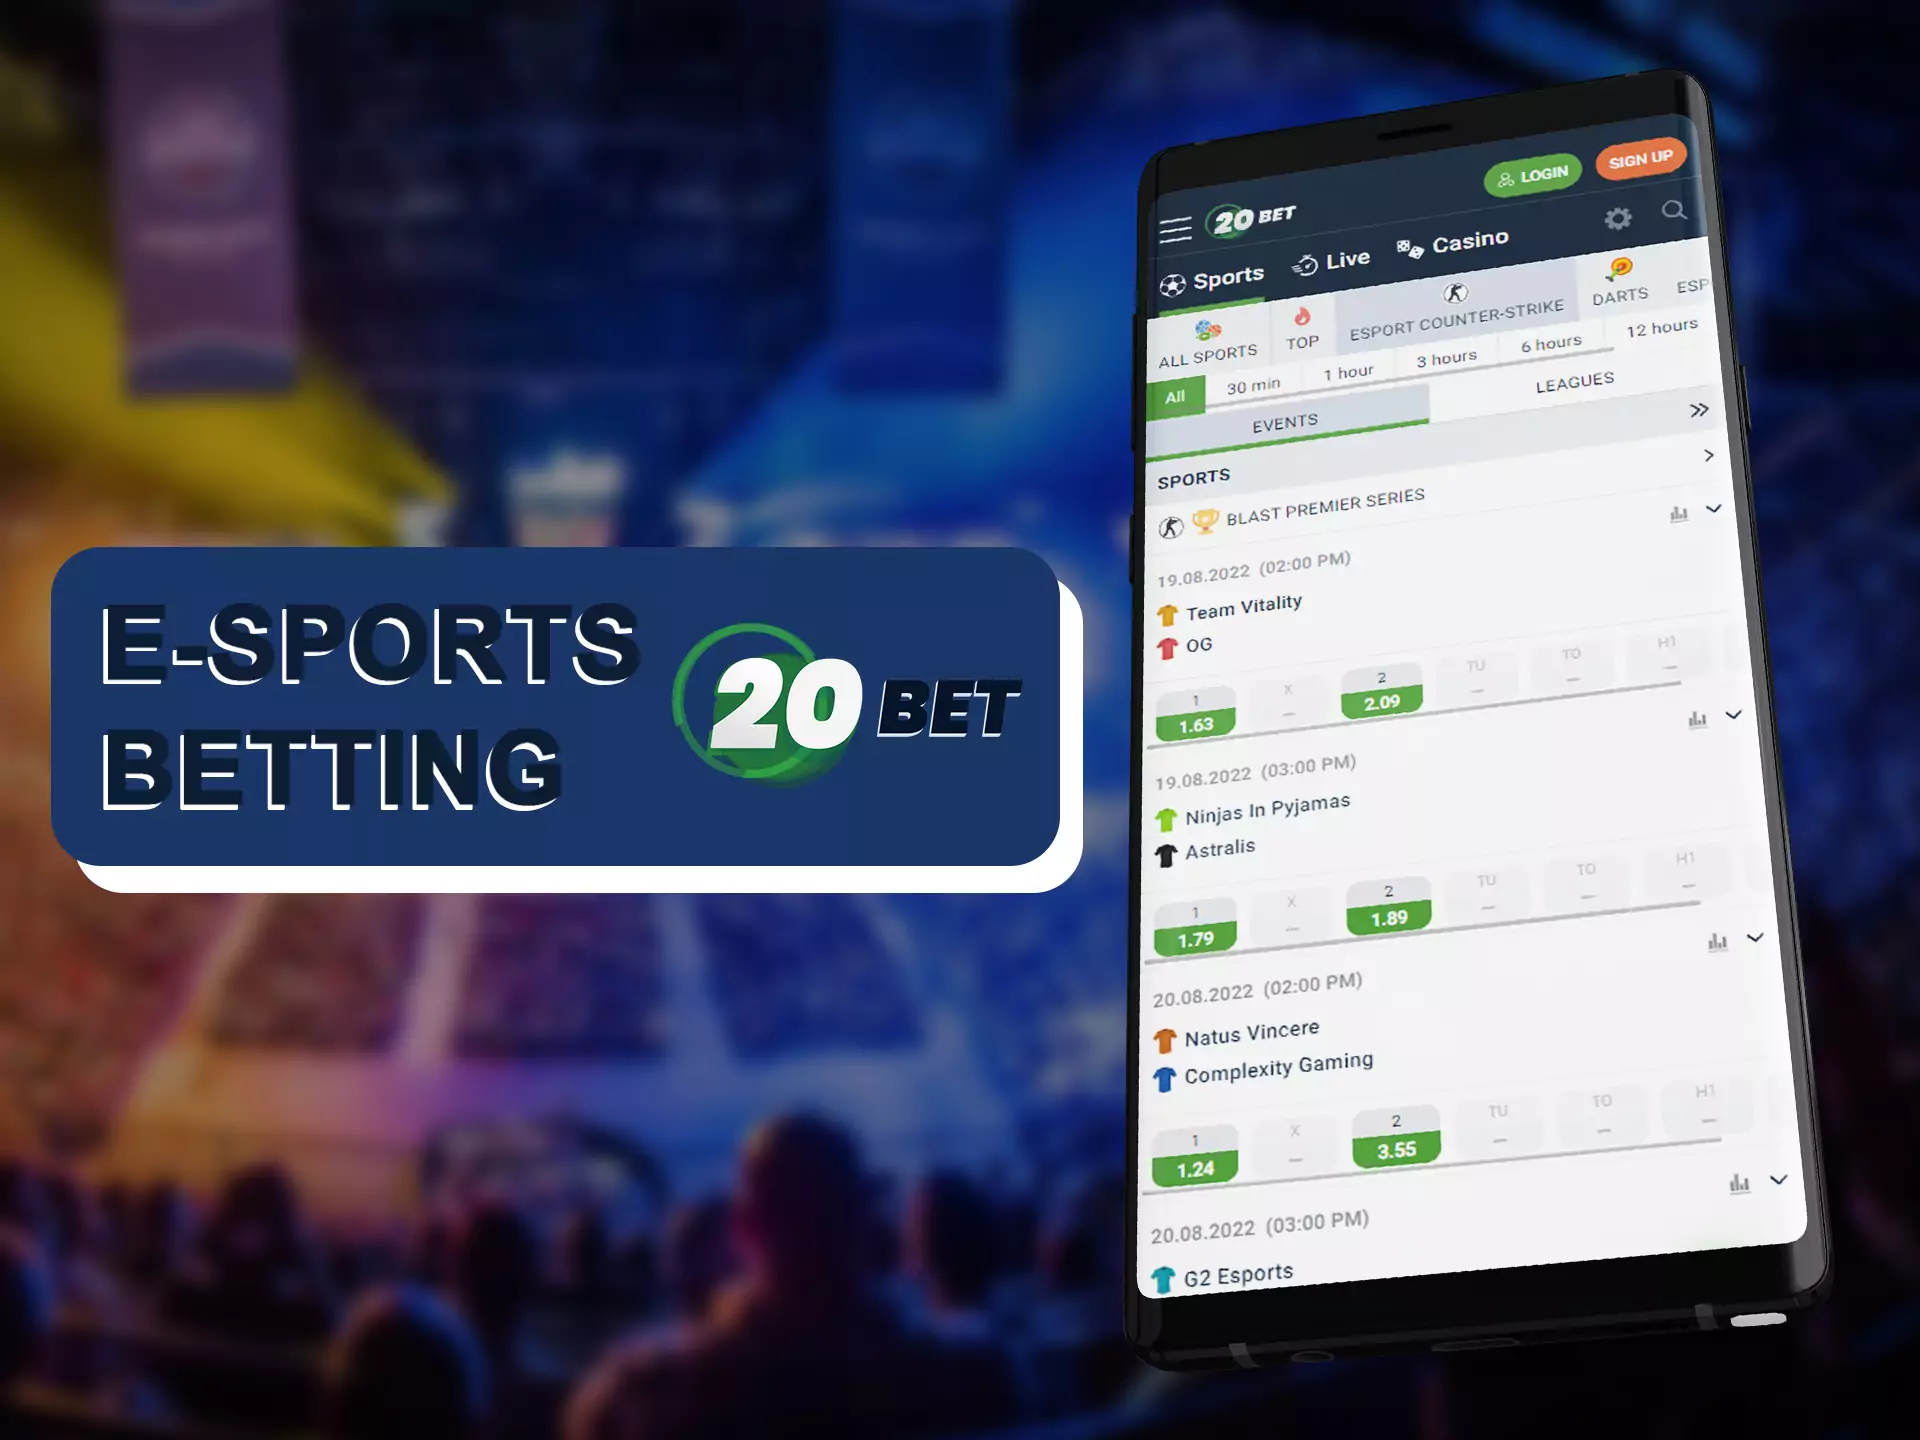 Bet on best esports team with the 20bet app.